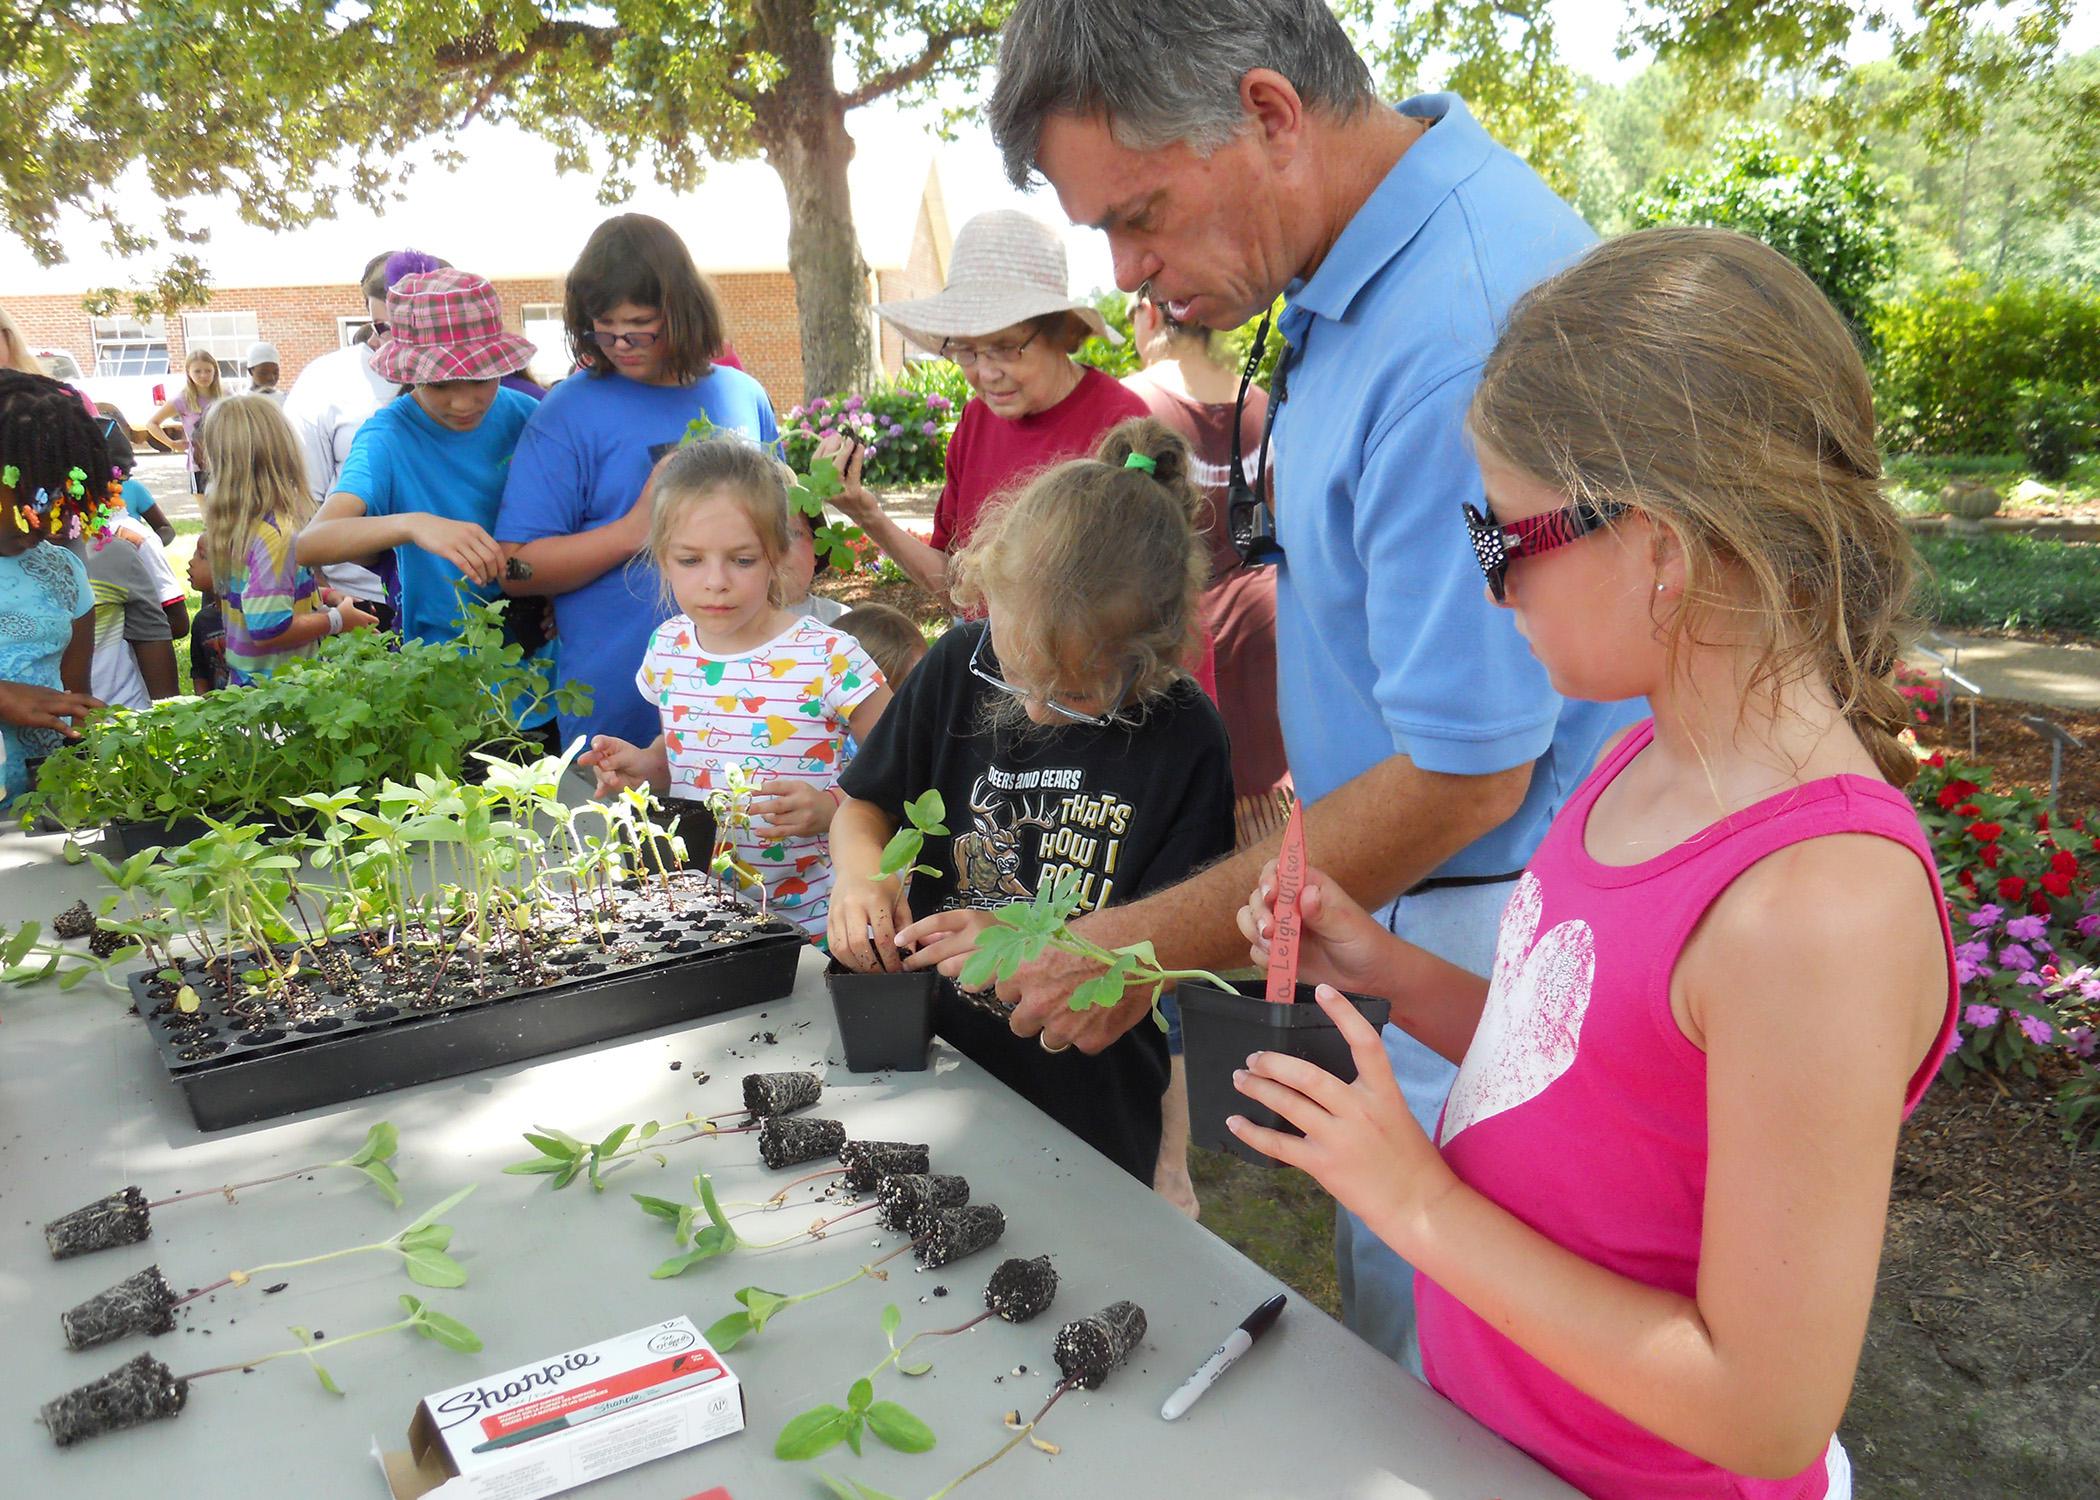 Bill Evans, center, helps Bayleigh Newman, left, and Olivia Leigh Williams, right, plant their watermelon seedlings at Mississippi State University's Truck Crops Station June 12. Employees at the station held a short program on gardening to complement the Dig into Reading theme of this year's statewide library summer reading program. (Photo by MSU Ag Communications/Susan Collins-Smith)